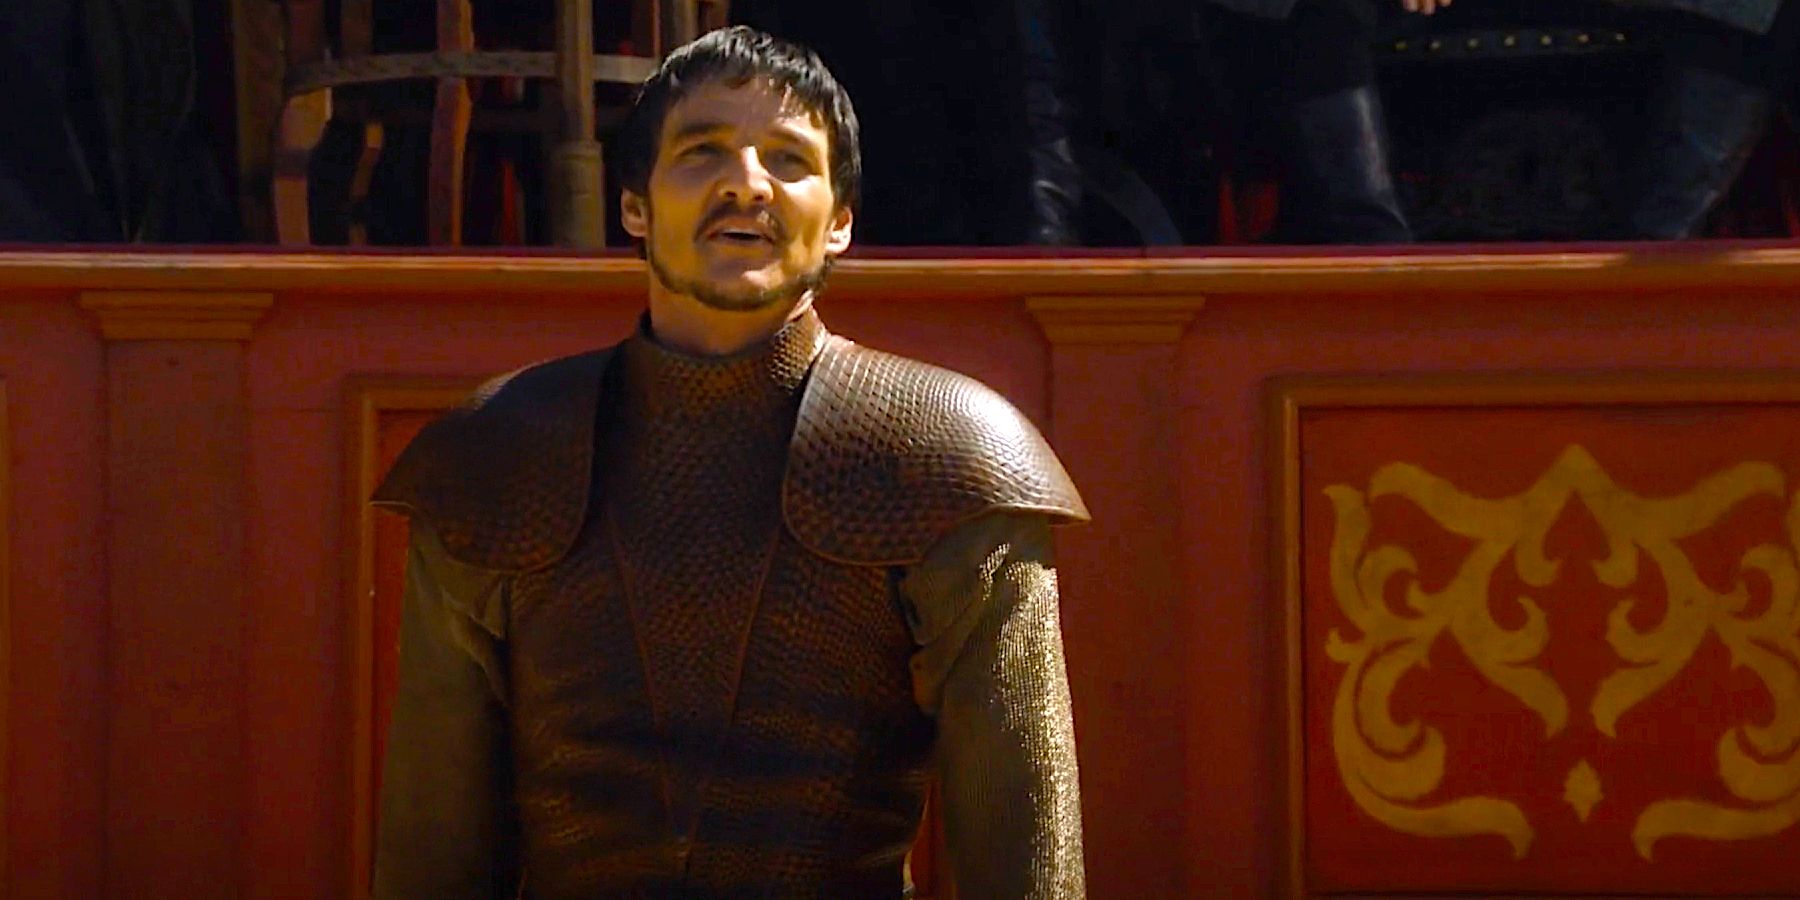 Oberyn suited up for trial by combat in Game of Thrones